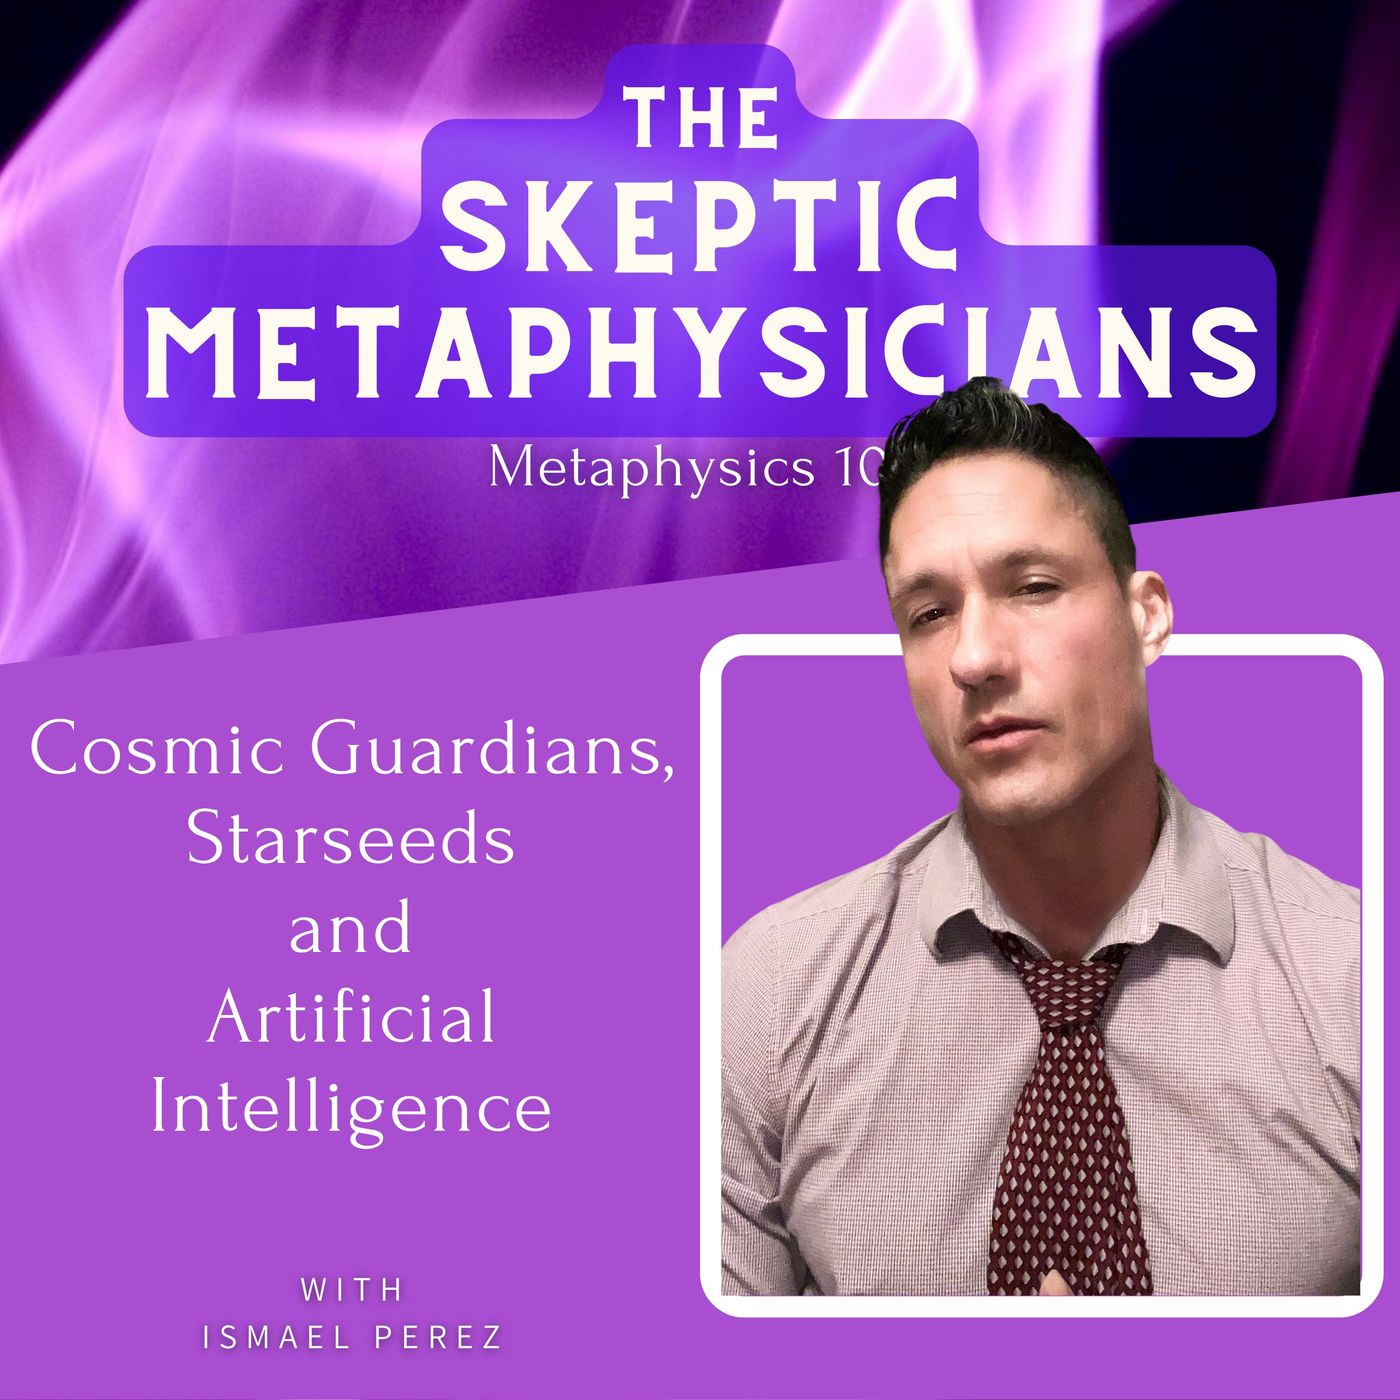 Cosmic Guardians, Starseeds and Artificial Intelligence Image